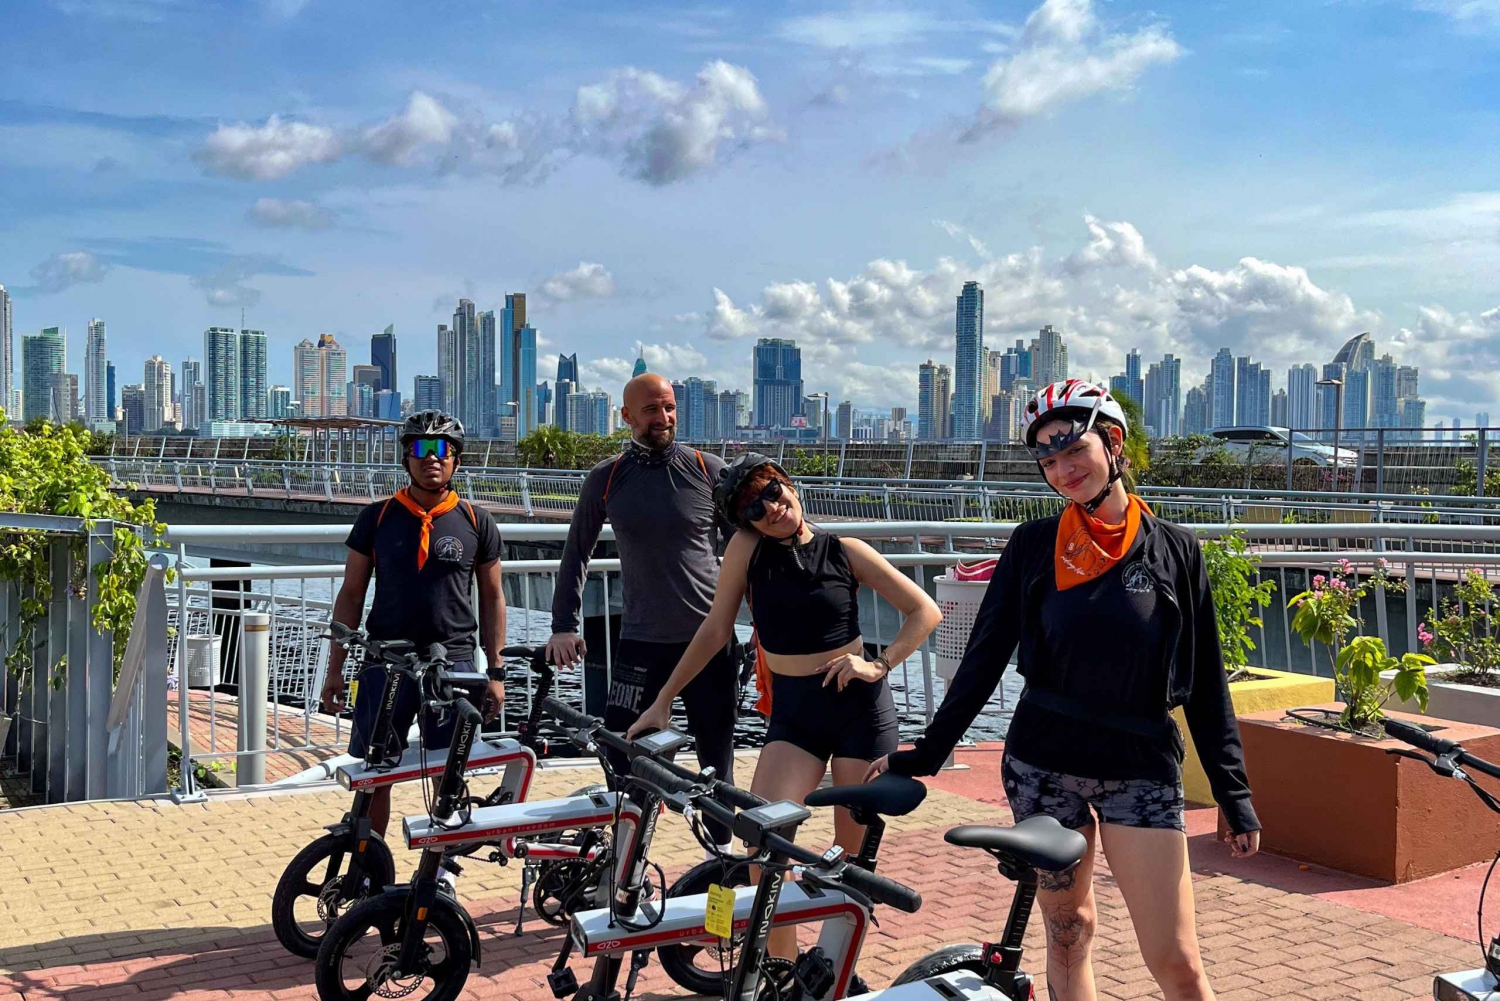 Highlights Bike Tour Panama City With Professional Guide